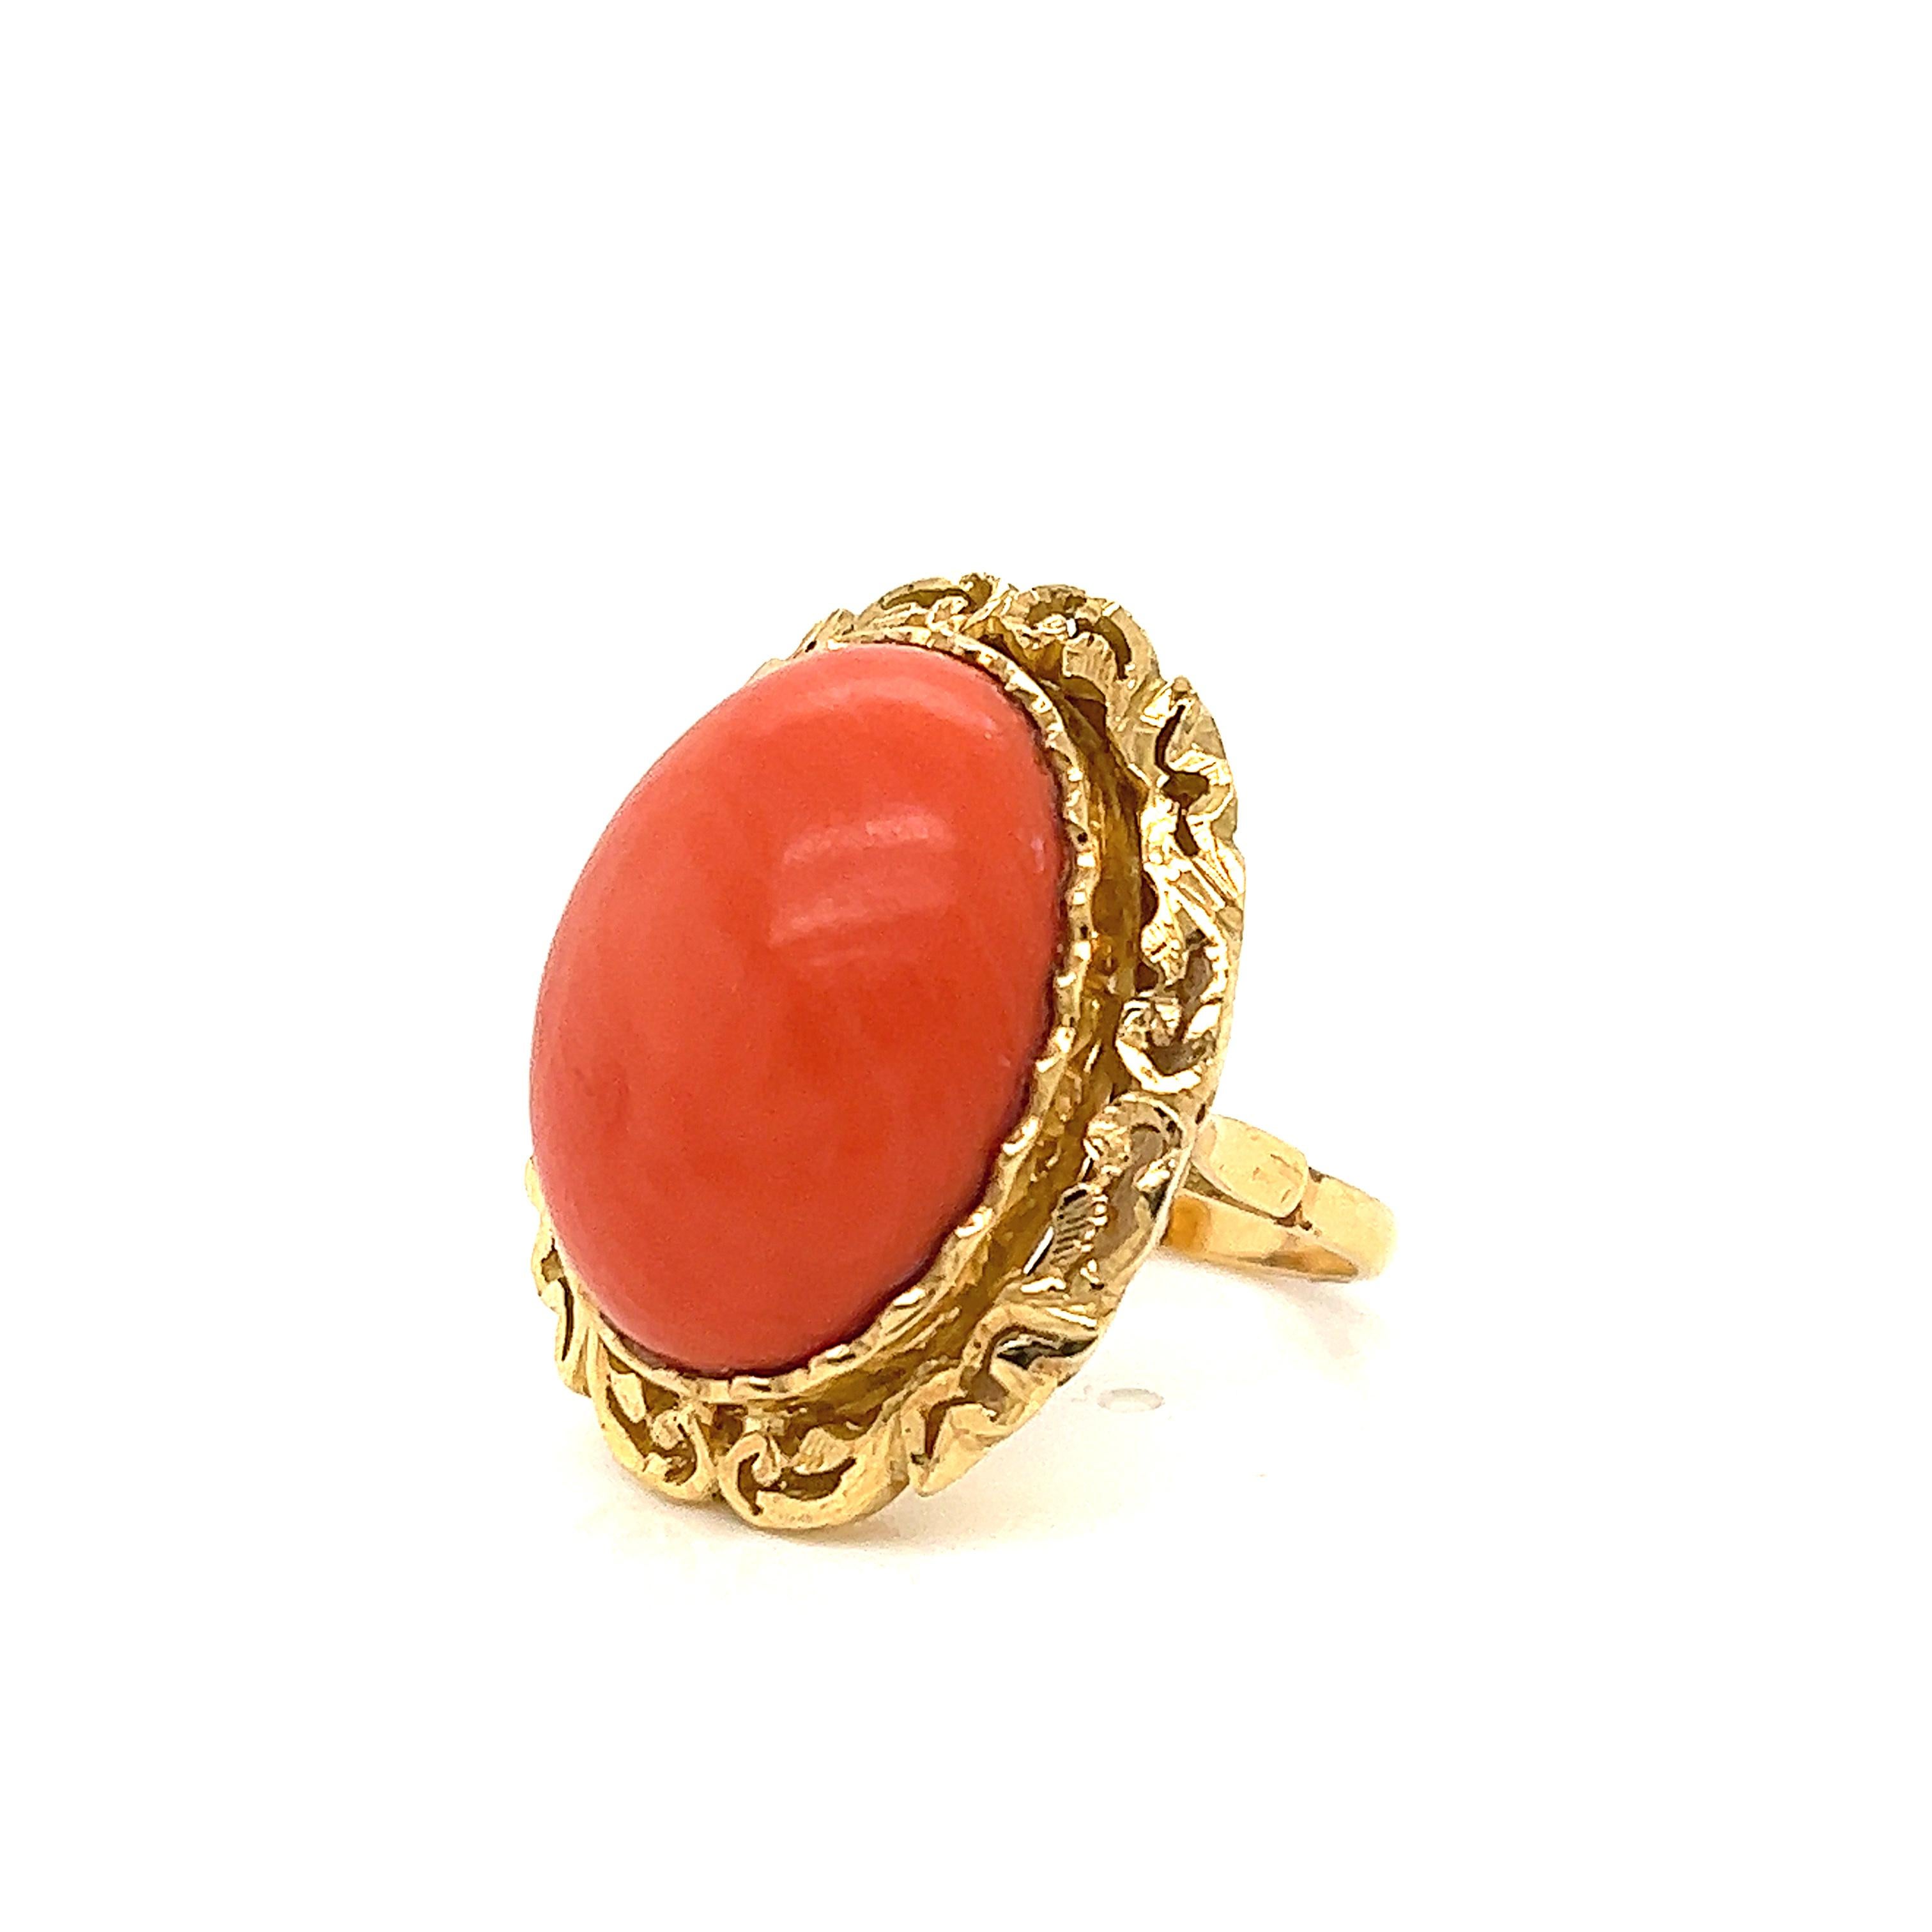 Retro Estate Coral Cabochon 18k Yellow Gold Cocktail Ring